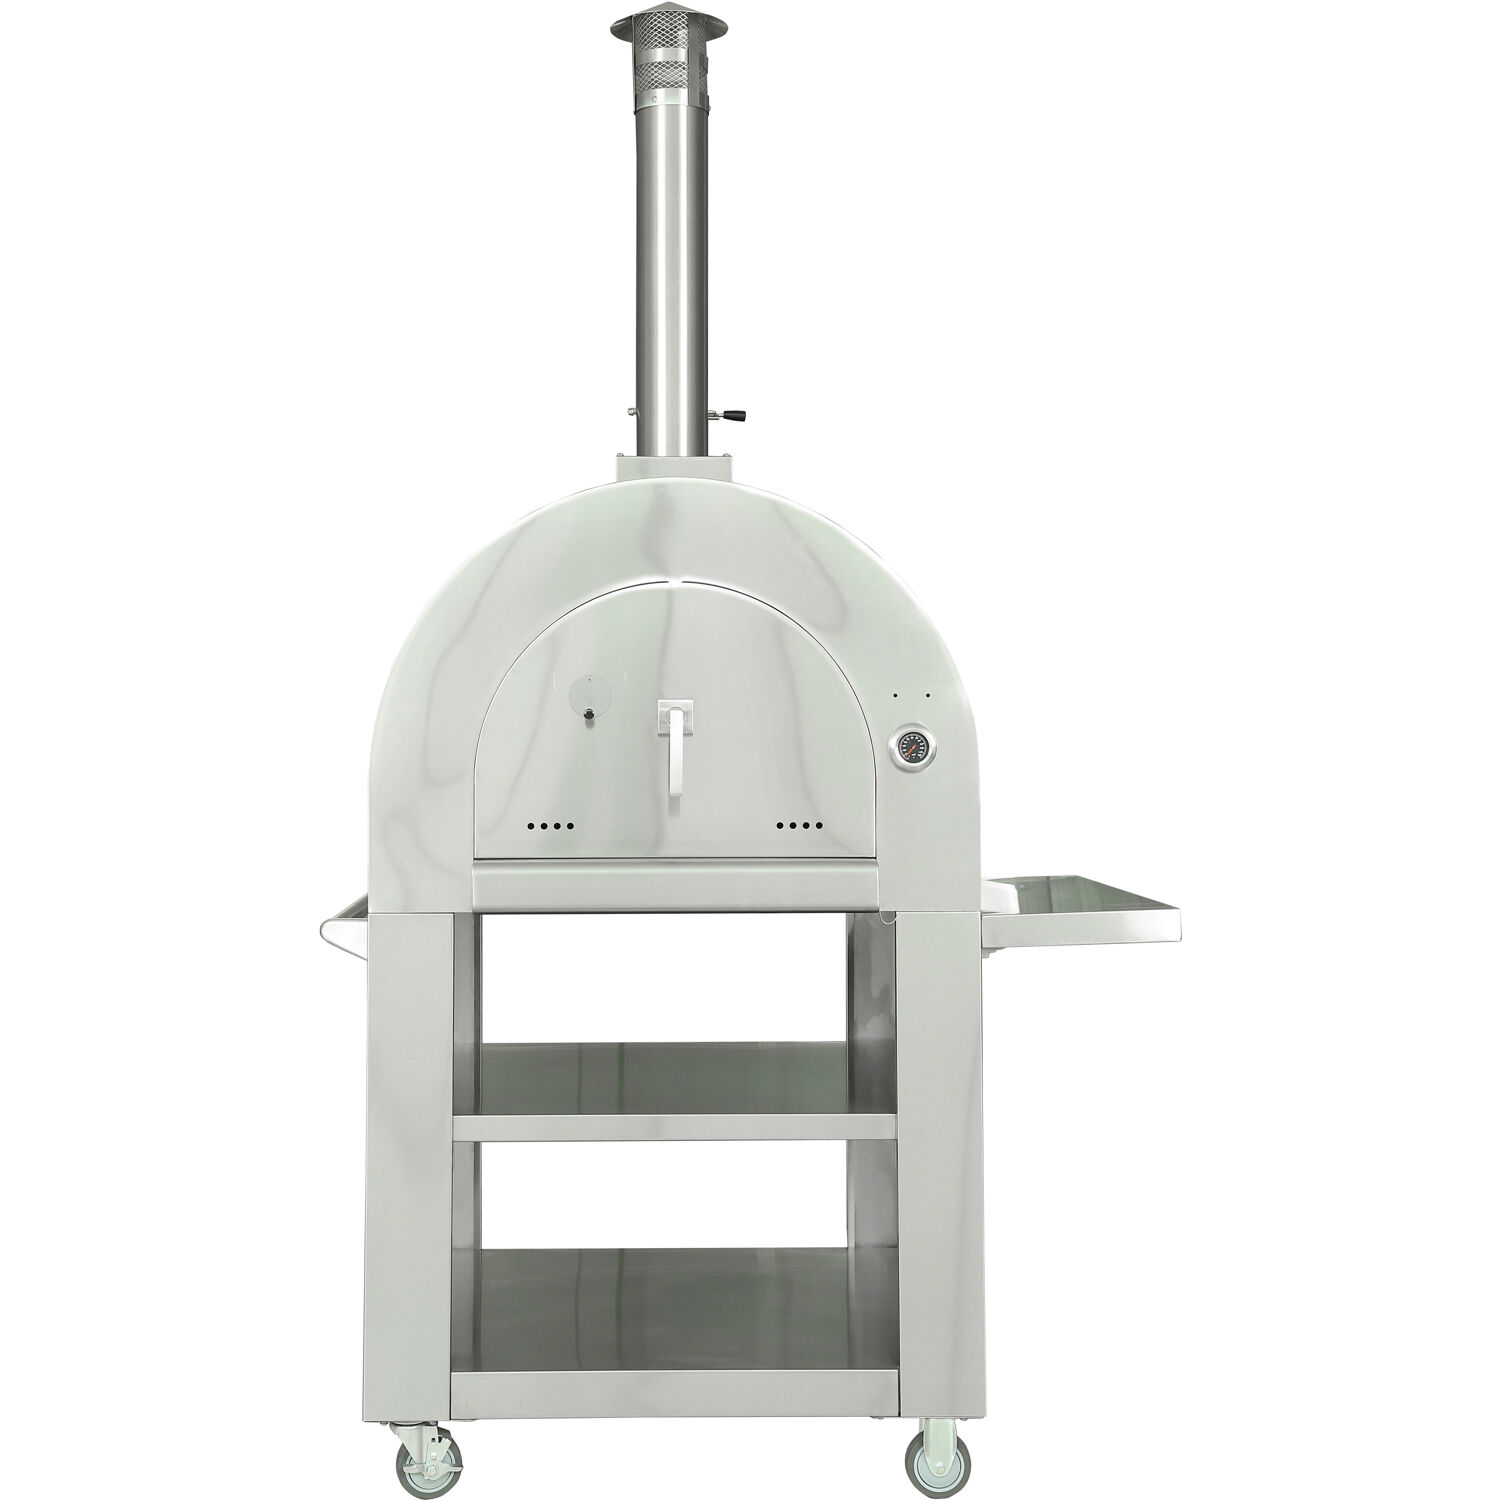 Hanover Portable Outdoor Wood Fired Pizza Oven | Stainless Steel Freestanding Homemade Pizza Maker with Built-In Thermometer, Shelves, Castors, and Ash-Tray - image 1 of 11